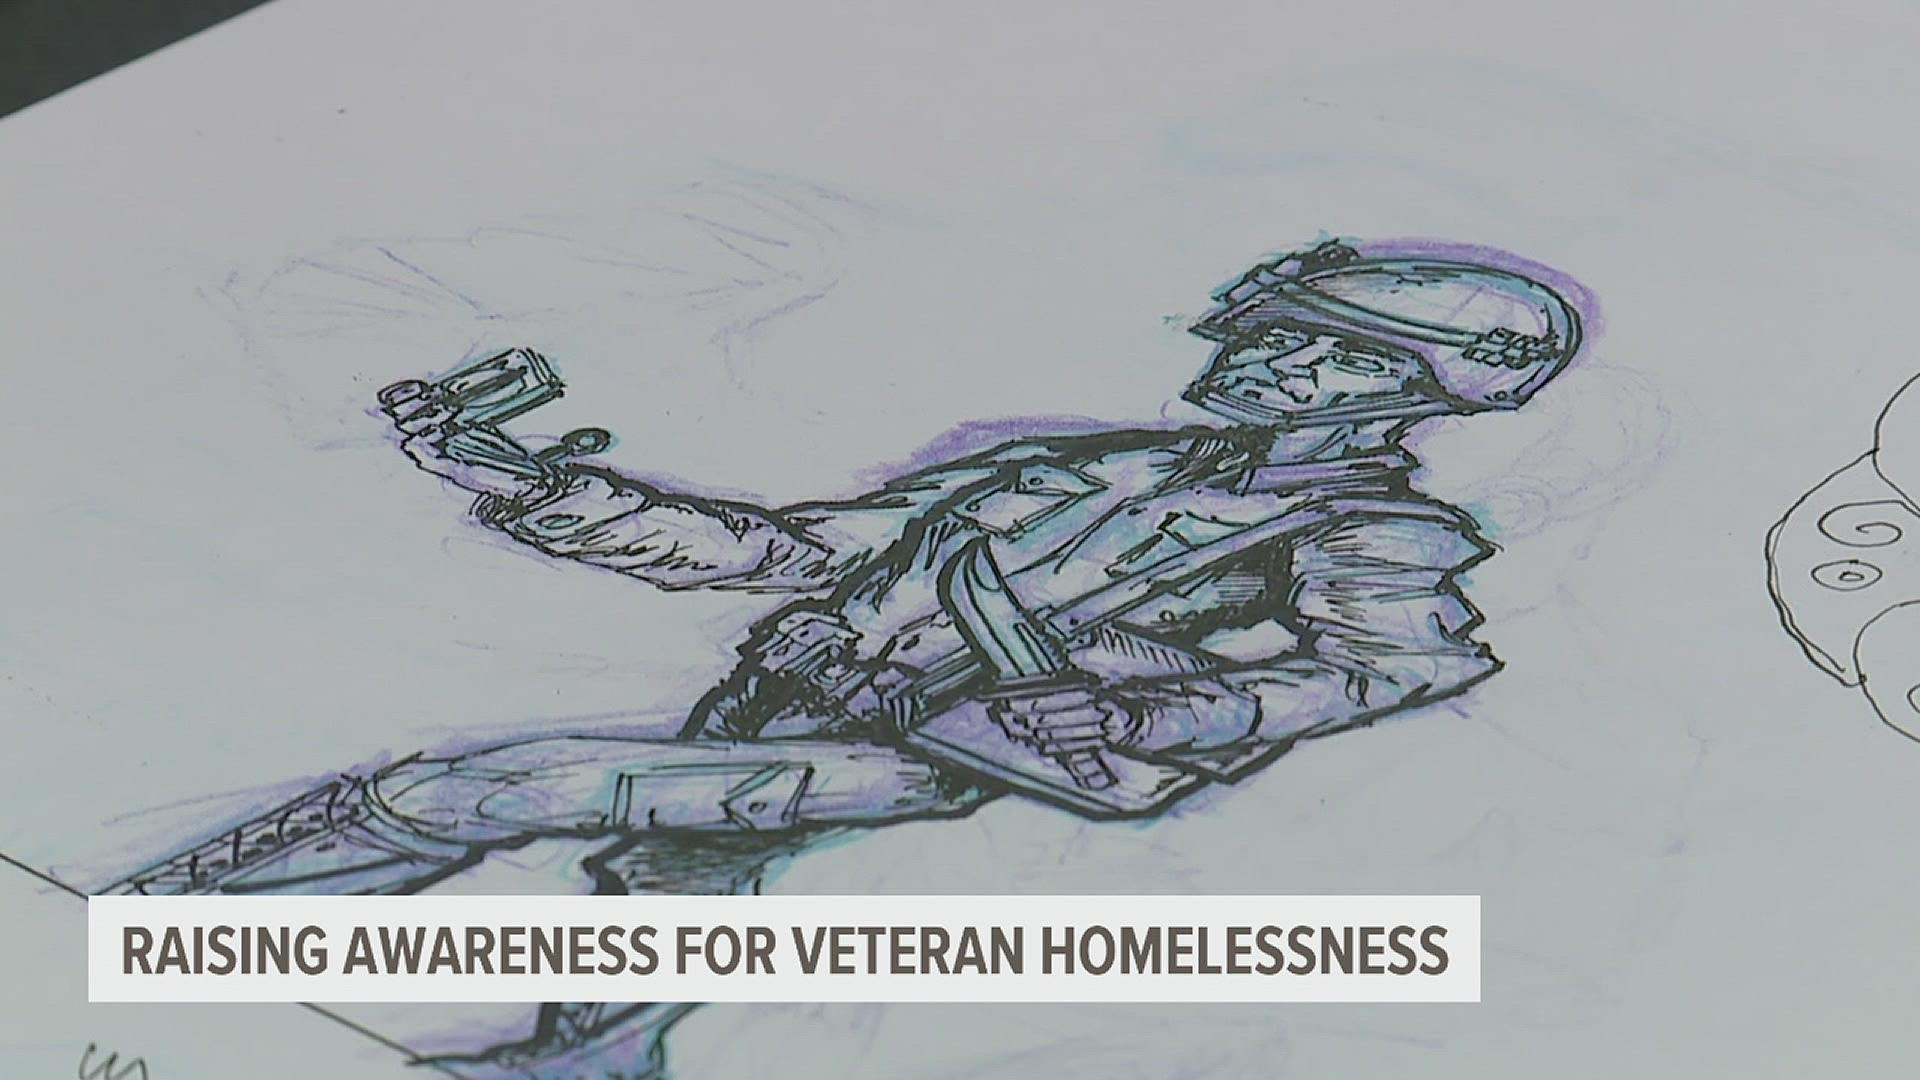 The comic "INVISIBLE" is meant to give a voice the often unseen homeless veteran community.